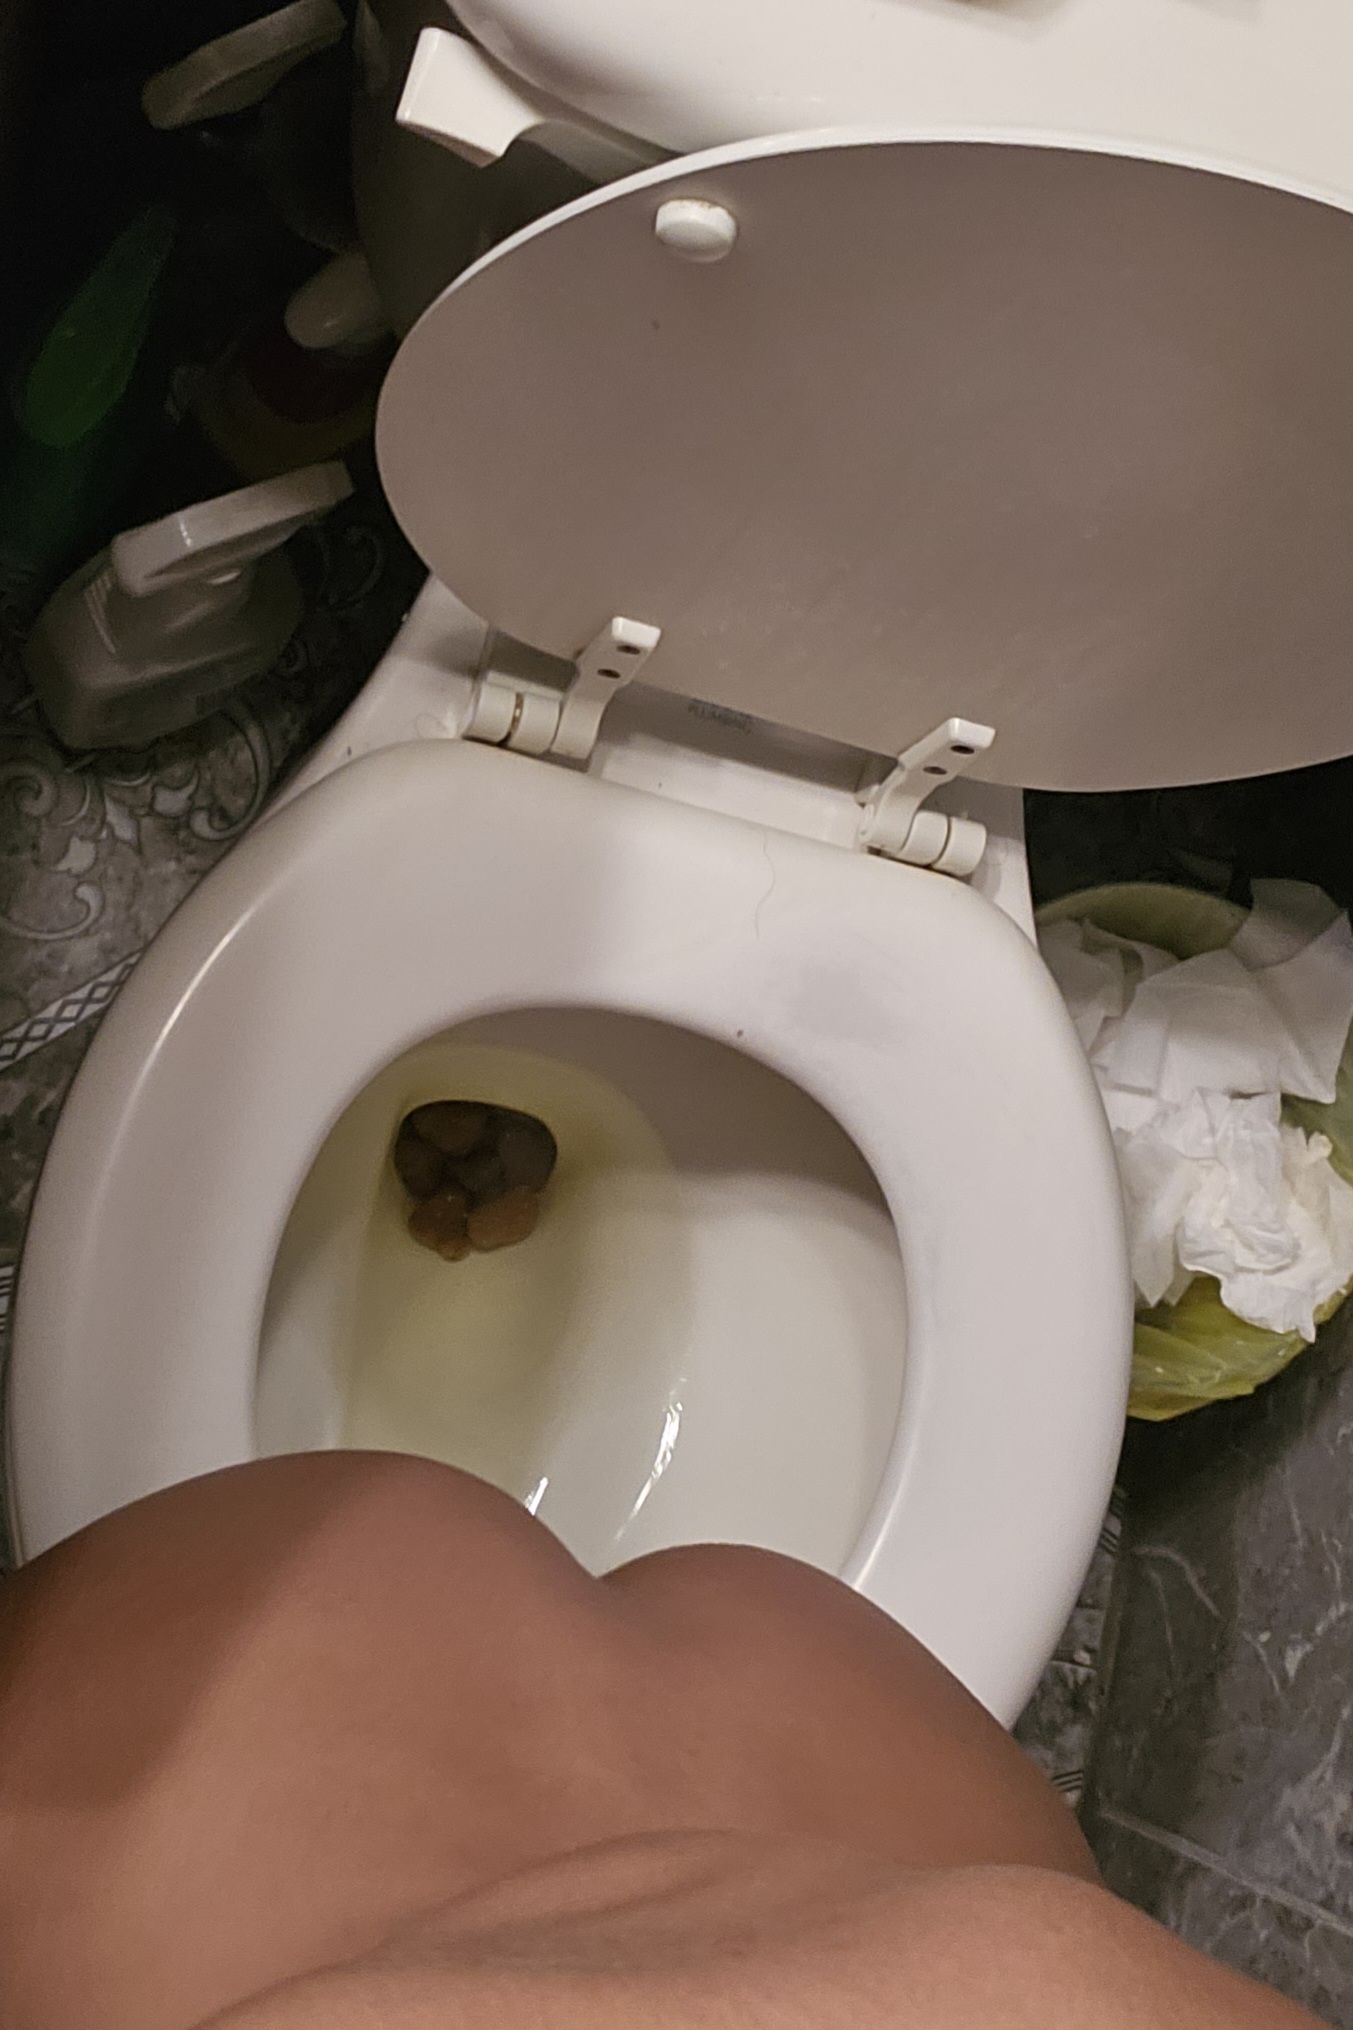 Girl pooping and peeing on toilet